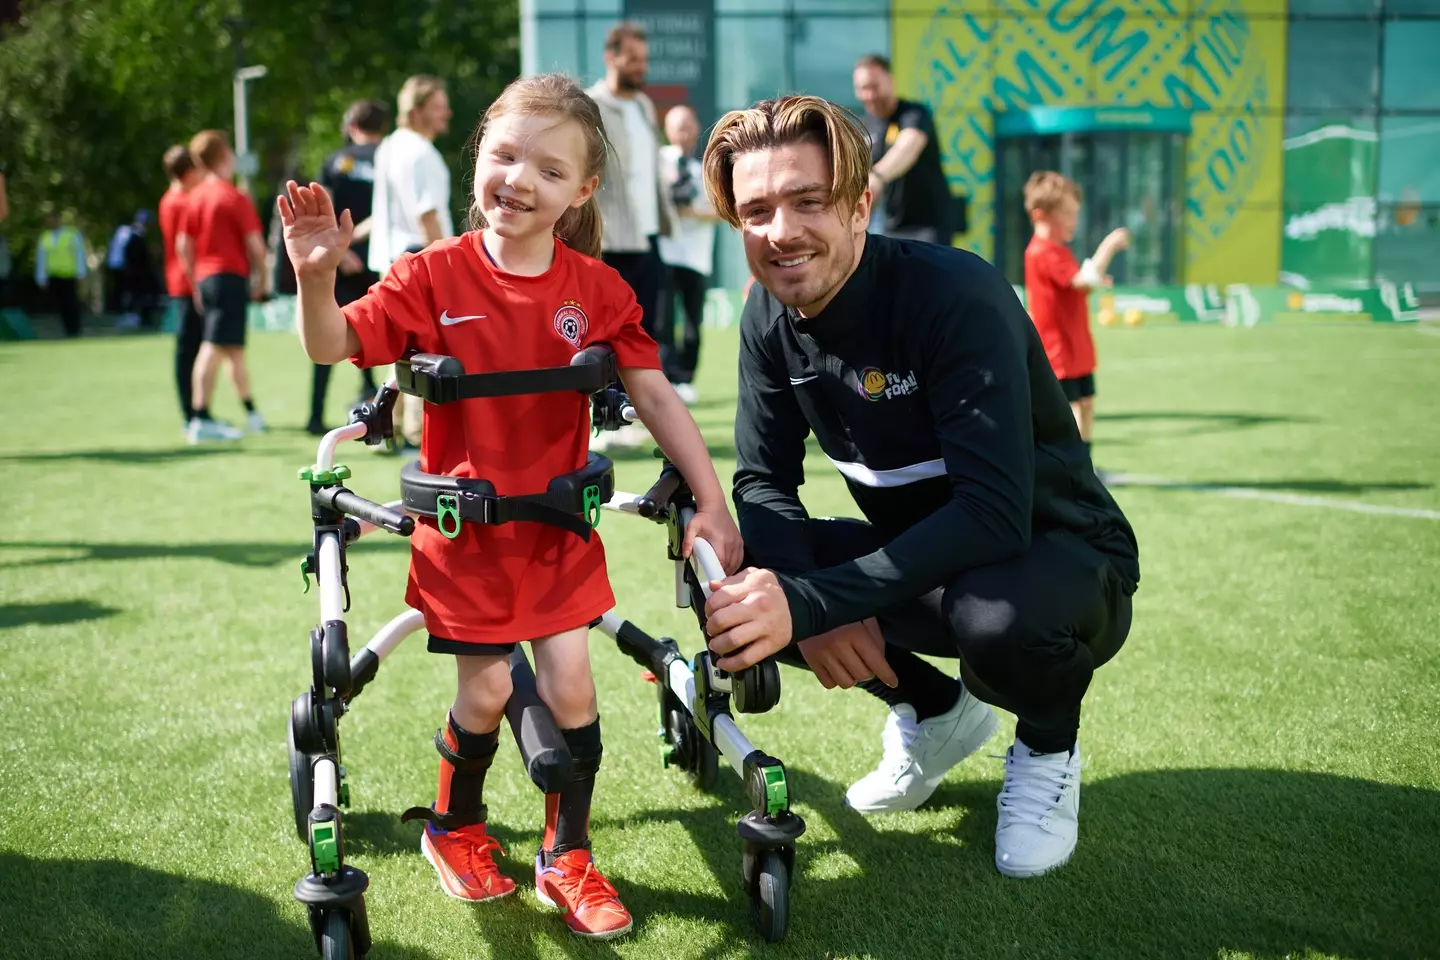 Jack Grealish is an ambassador for McDonald’s Fun Football, which is encouraging kids aged 5-11 across the UK to enjoy their sessions for free (Photo via McDonalds Fun Football)